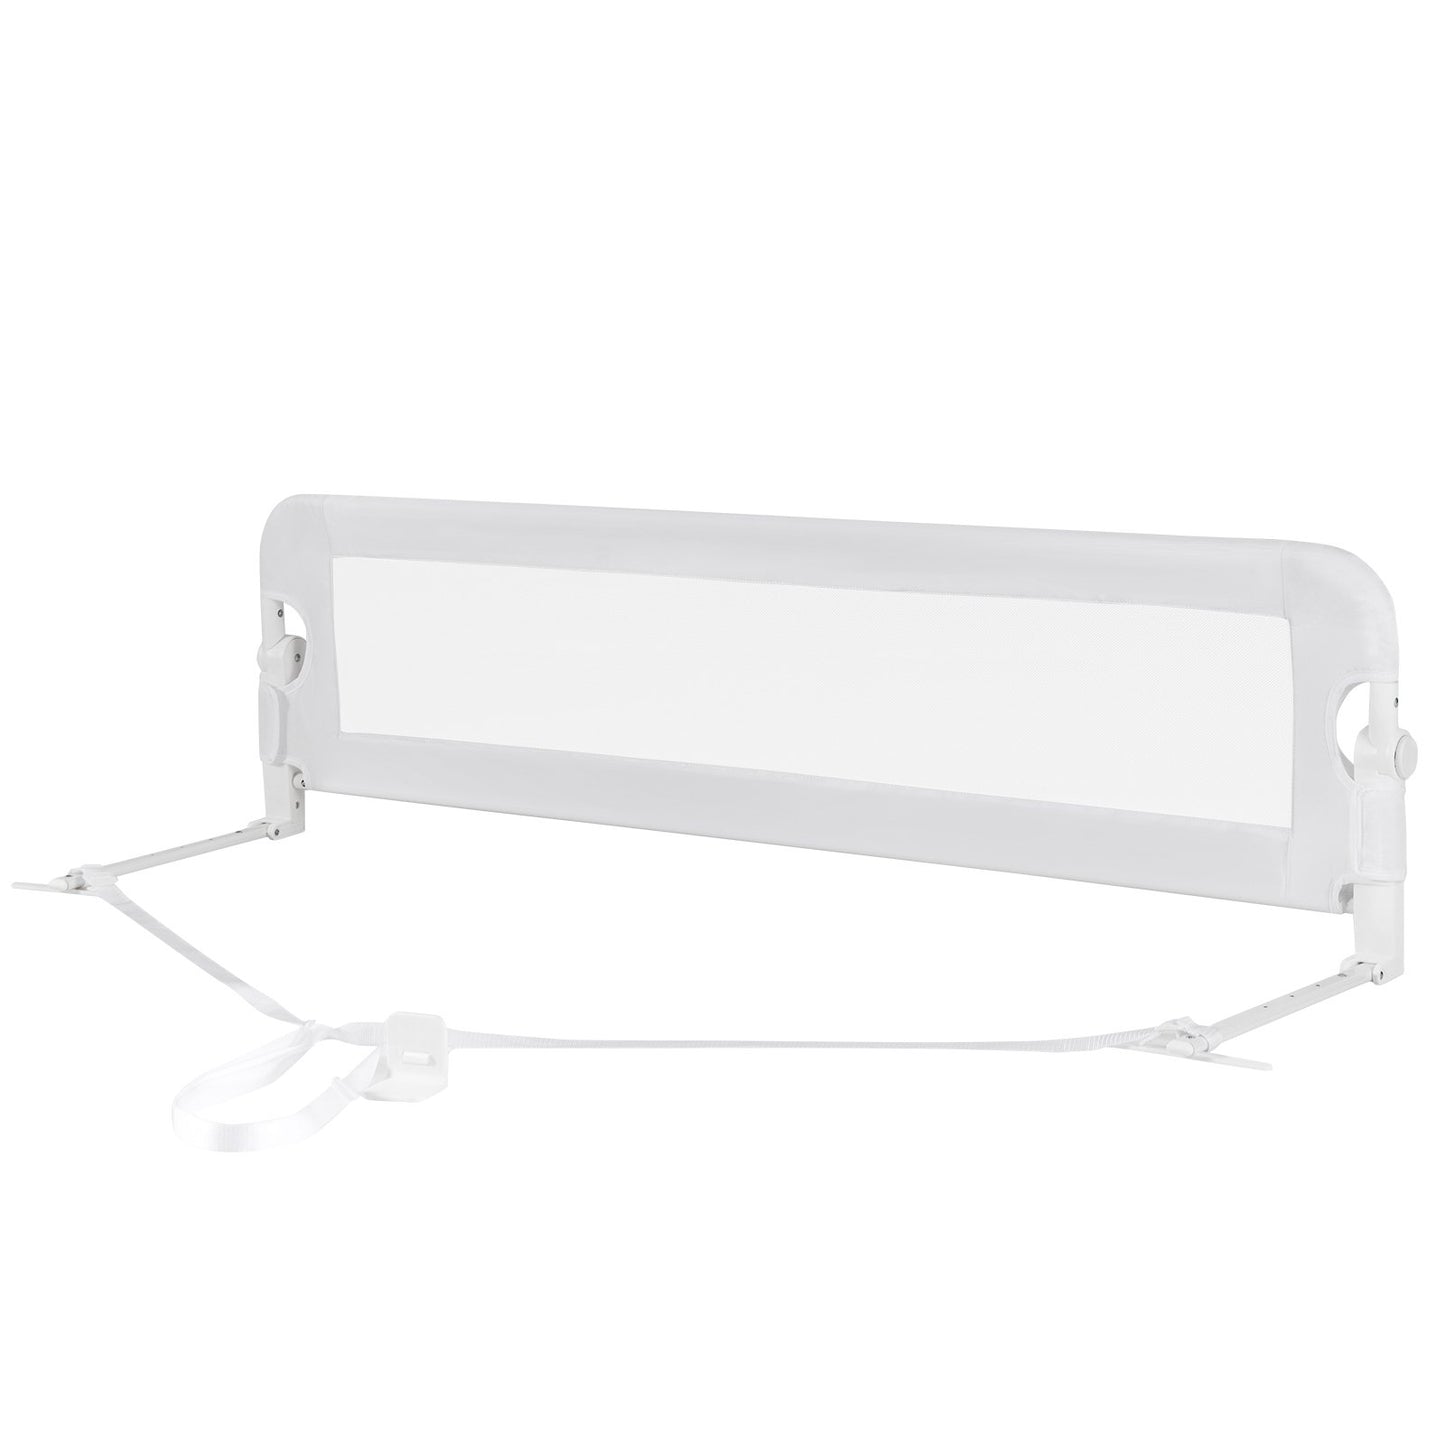 48 Inch Breathable Baby Swing Down Safety Bed Rail Guard, White